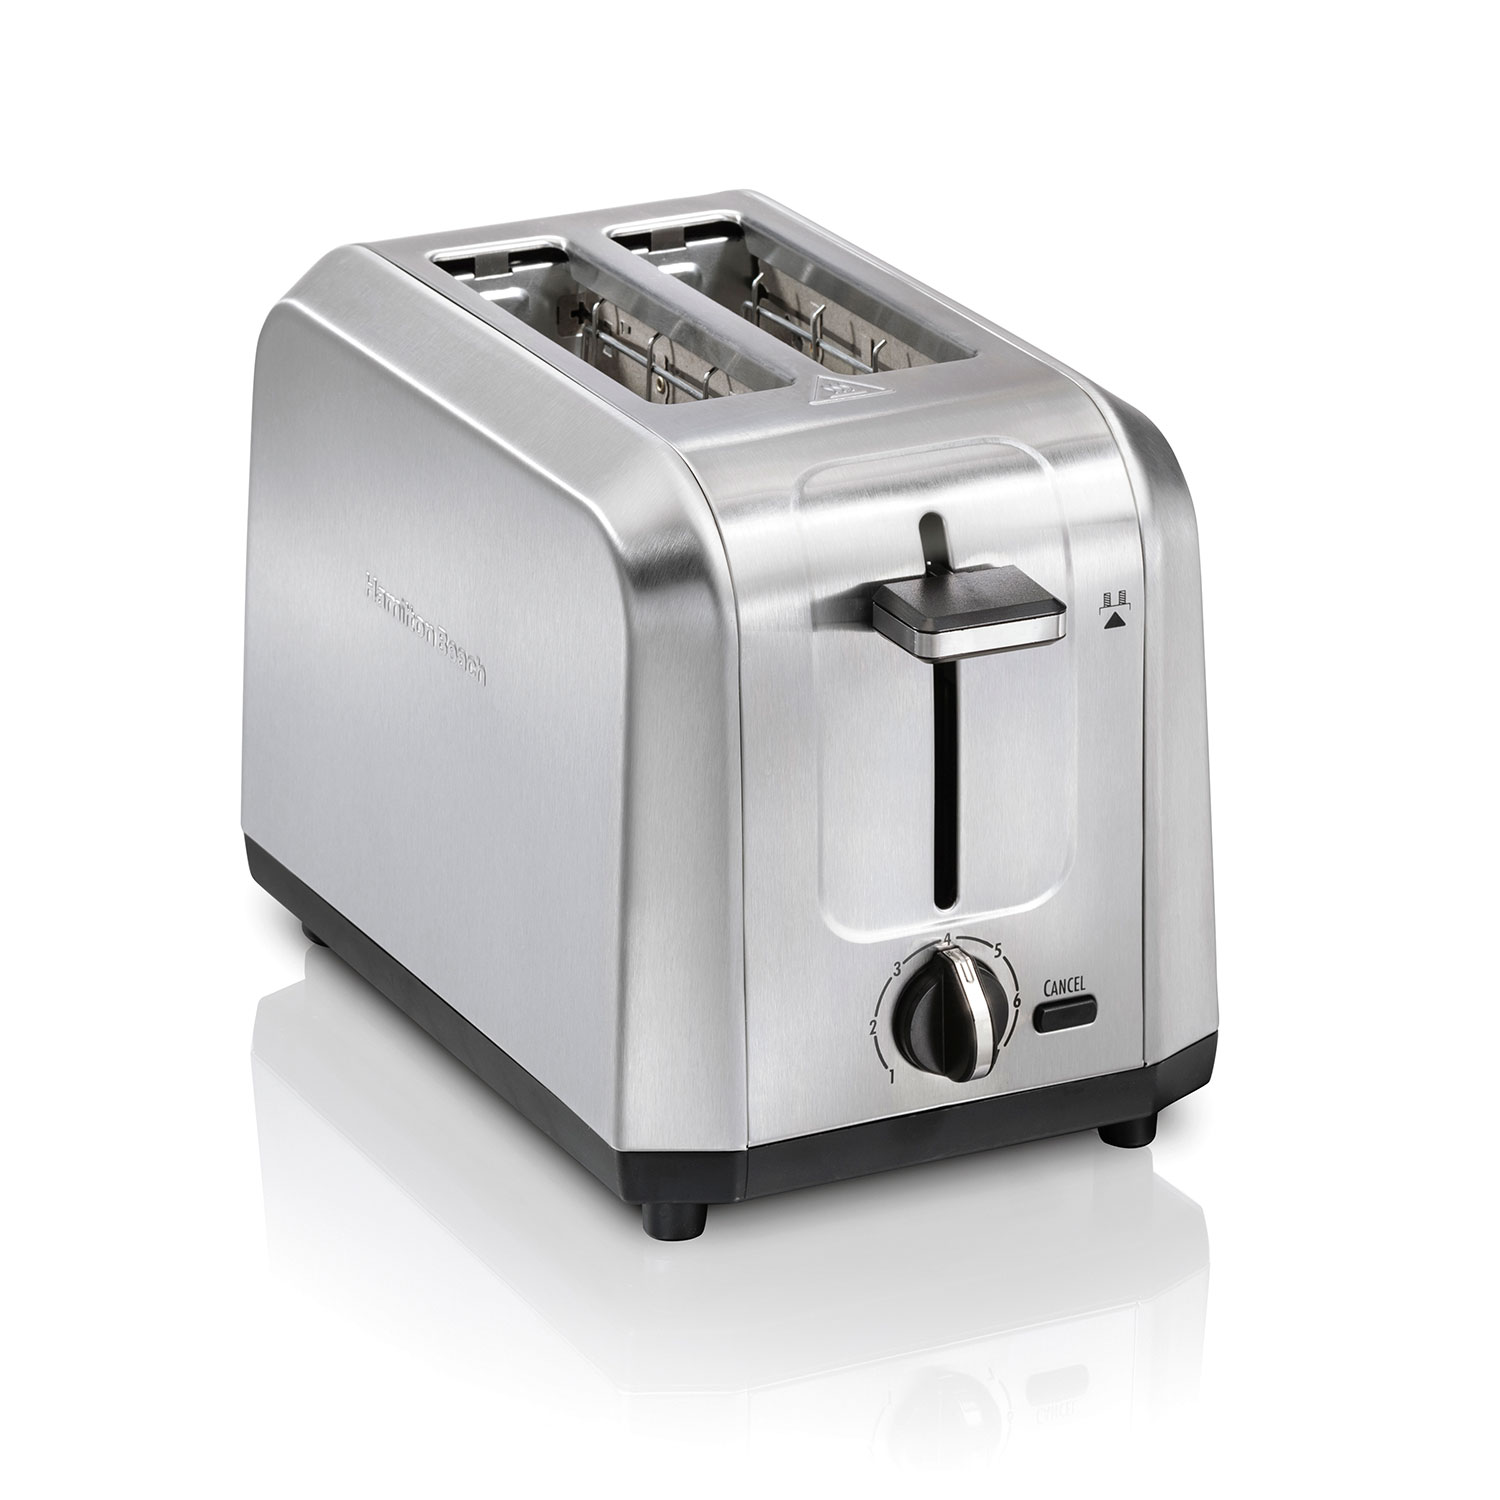 2 Slice Toaster with Extra-Wide Slots, Stainless Steel (22912)